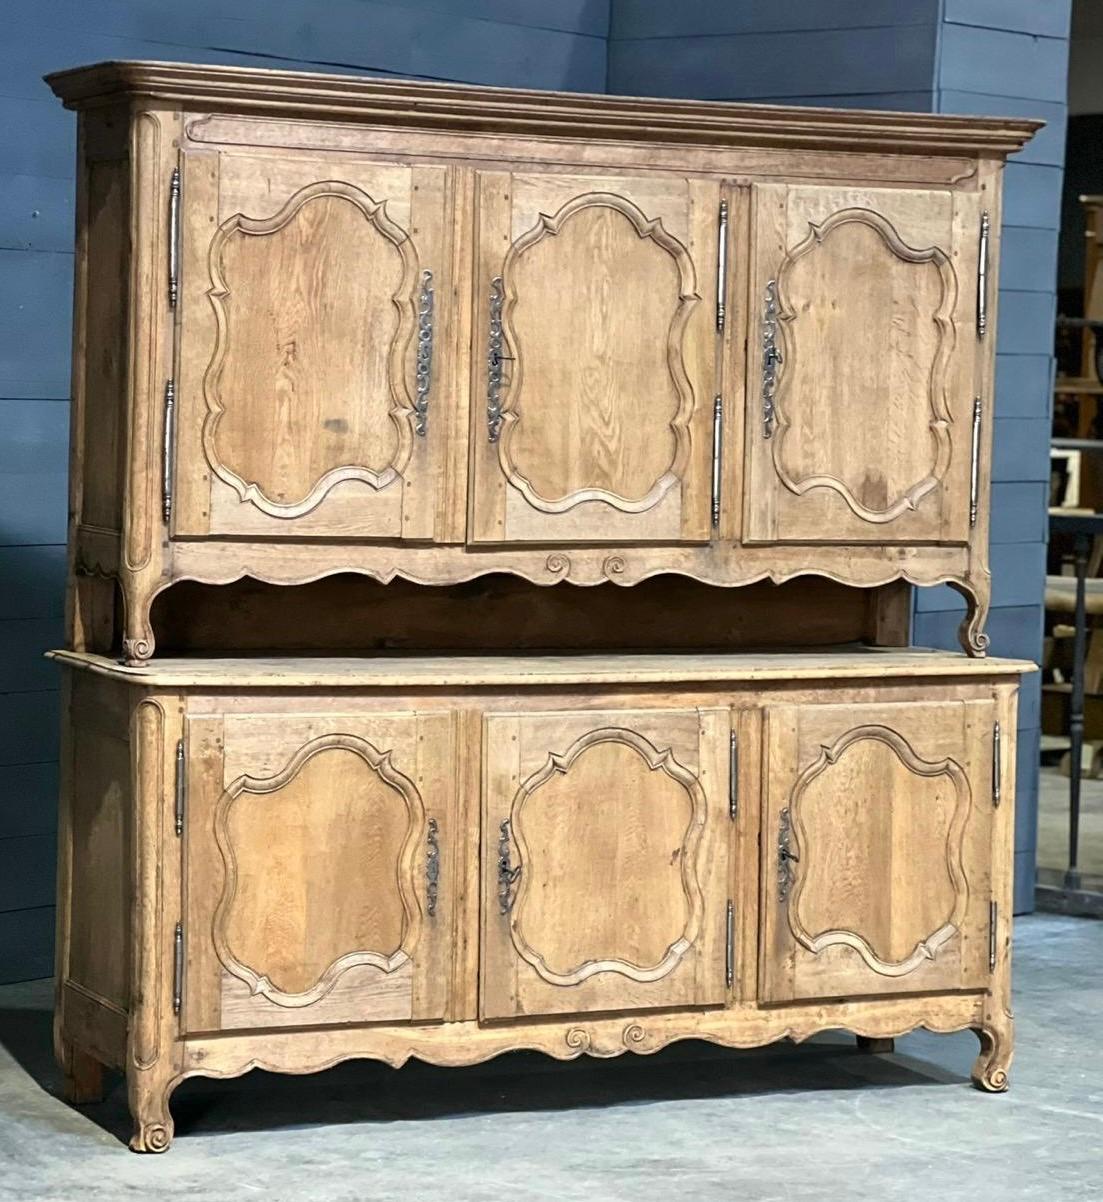 A delightful and rare large French Larder Cupboard or Cabinet. Made from solid Oak and dating to the 19th Century this piece has loads of charm and character. Of course it could be used a variety of settings and offer excellent amounts of